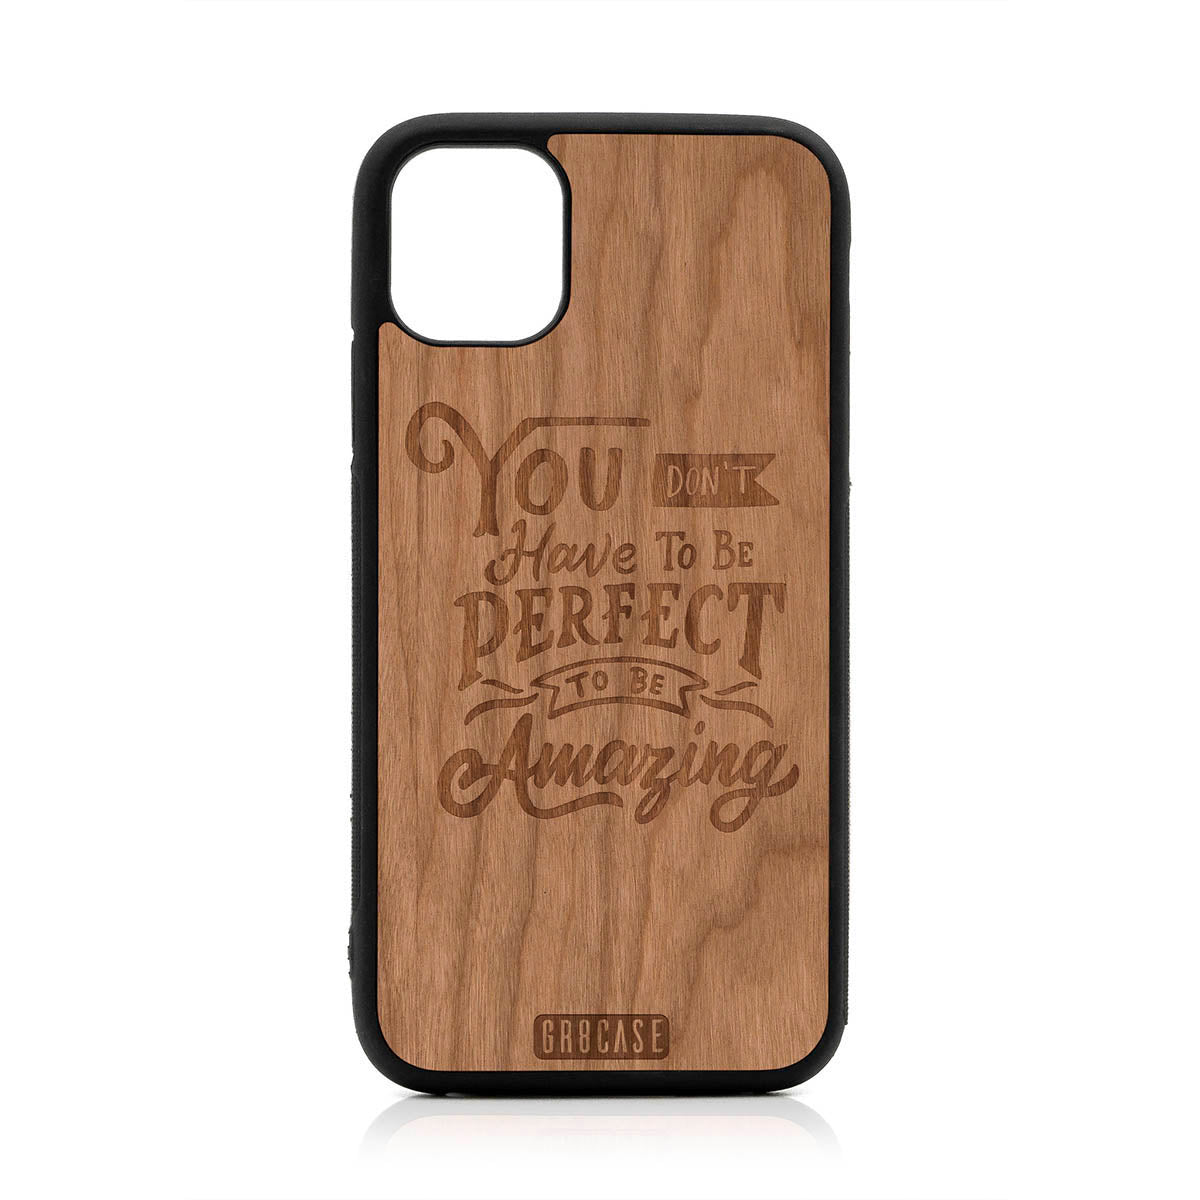 You Don't Have To Be Perfect To Be Amazing Design Wood Case For iPhone 11